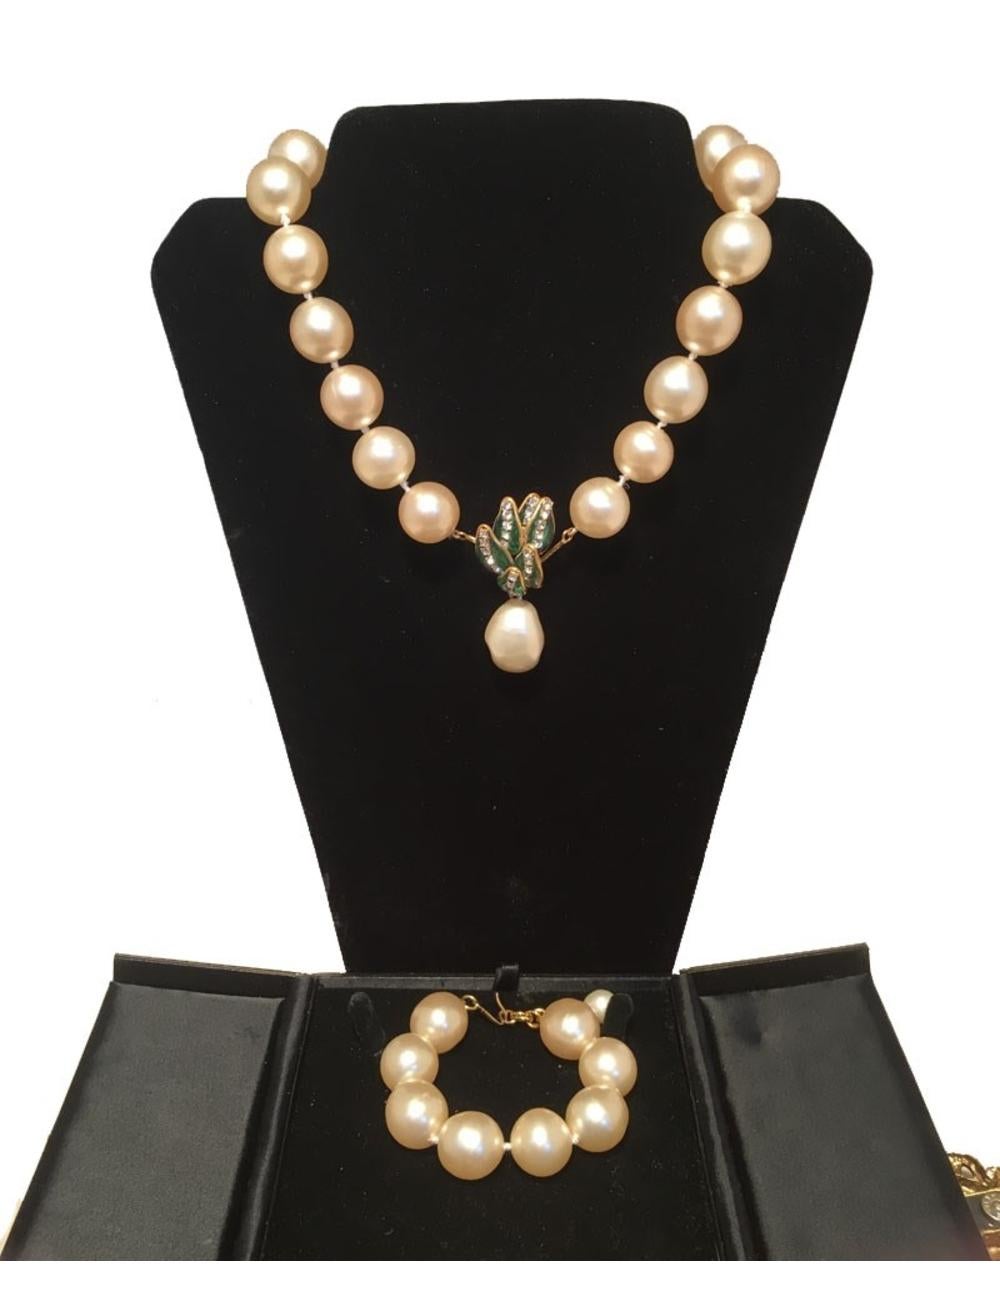 Stunning Chanel pearl and enamel necklace and bracelet set in excellent condition.  3/4